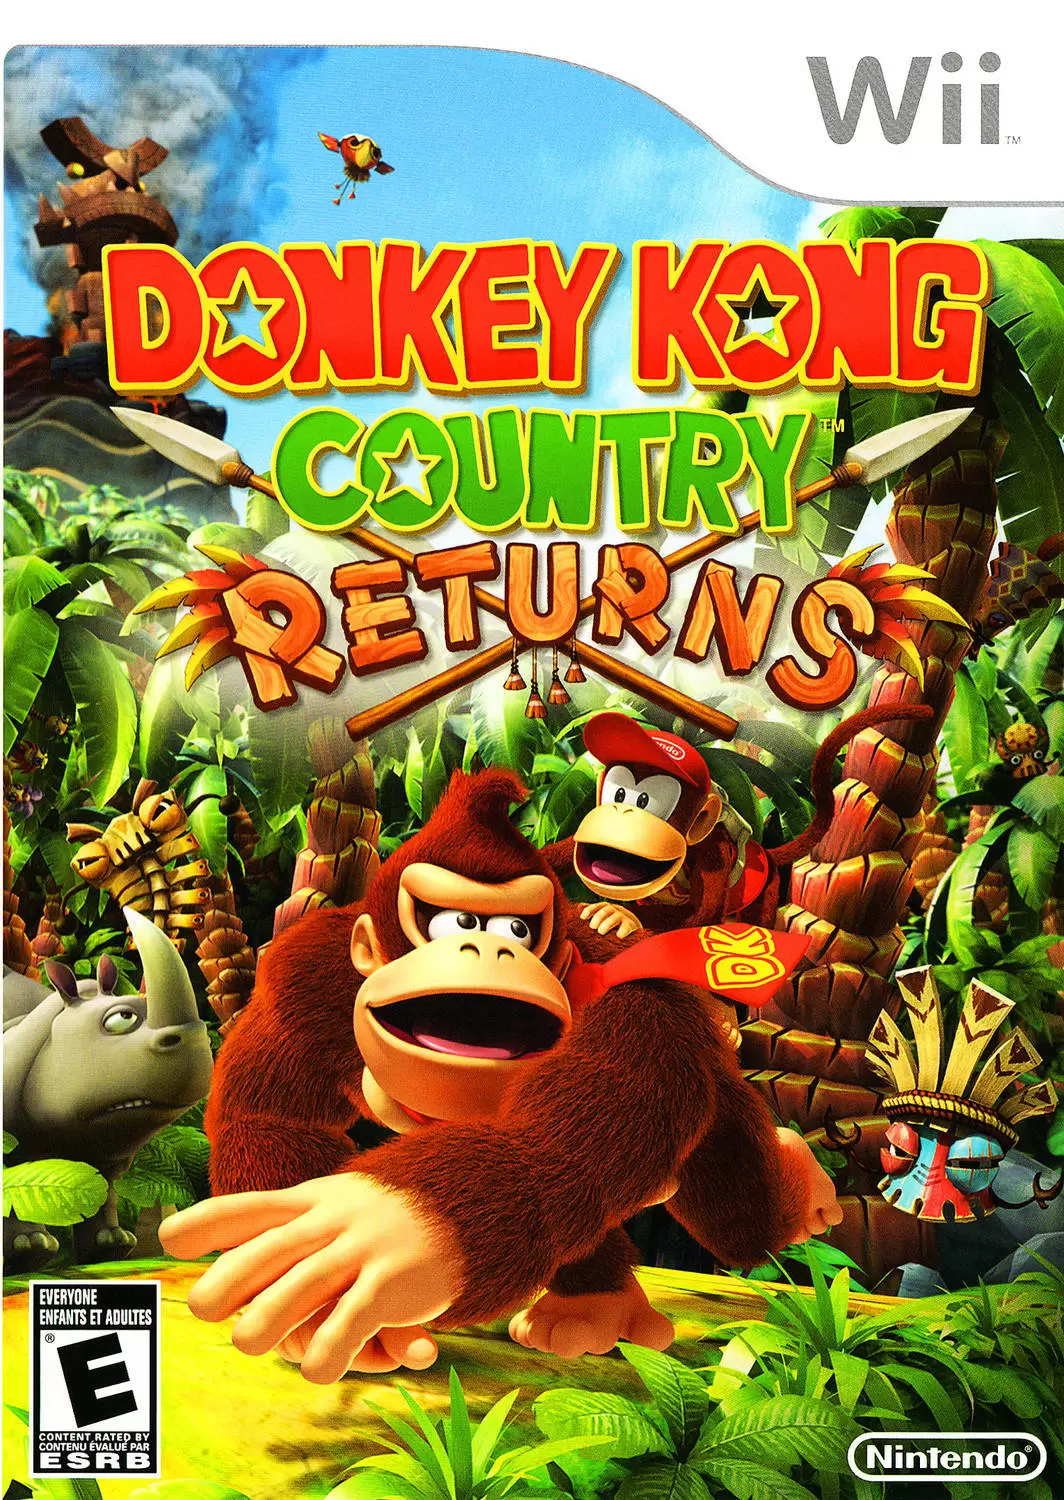 Nintendo Wii Games - Donkey Kong Country Returns